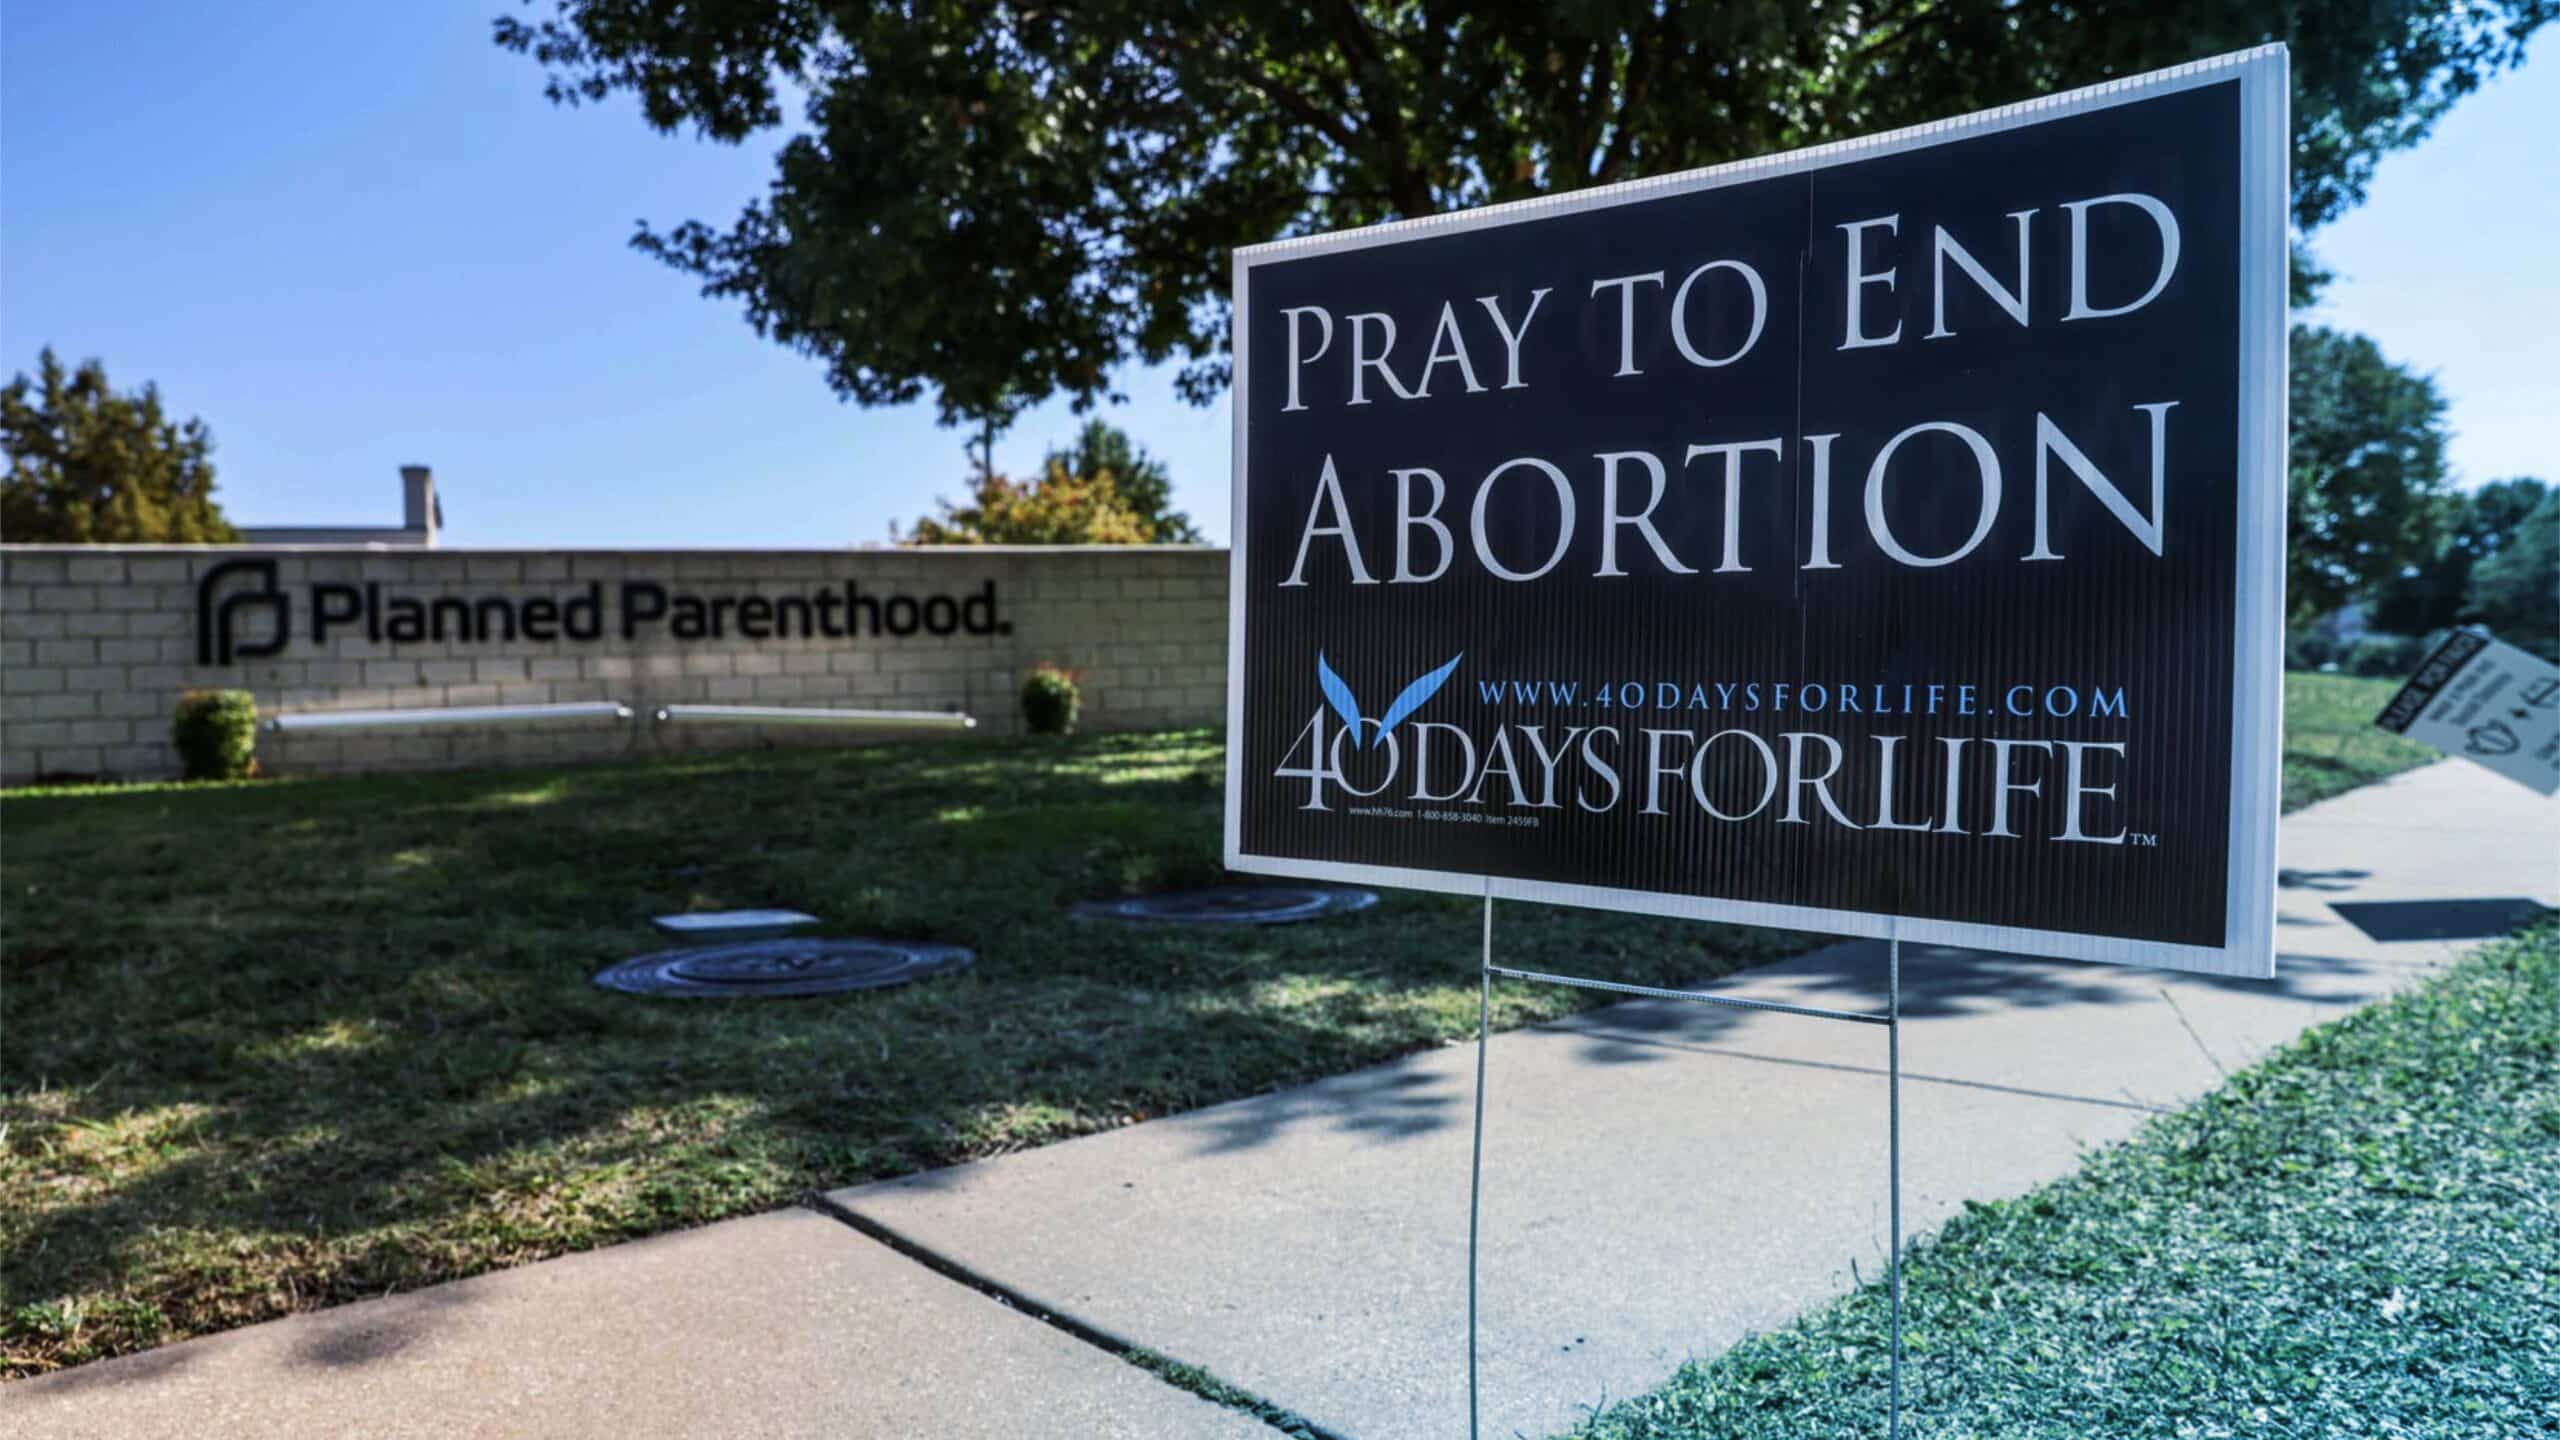 California’s Latest Free Speech Restrictions Protecting
Abortion Facilities are Unconstitutional, Lawsuits Allege 1